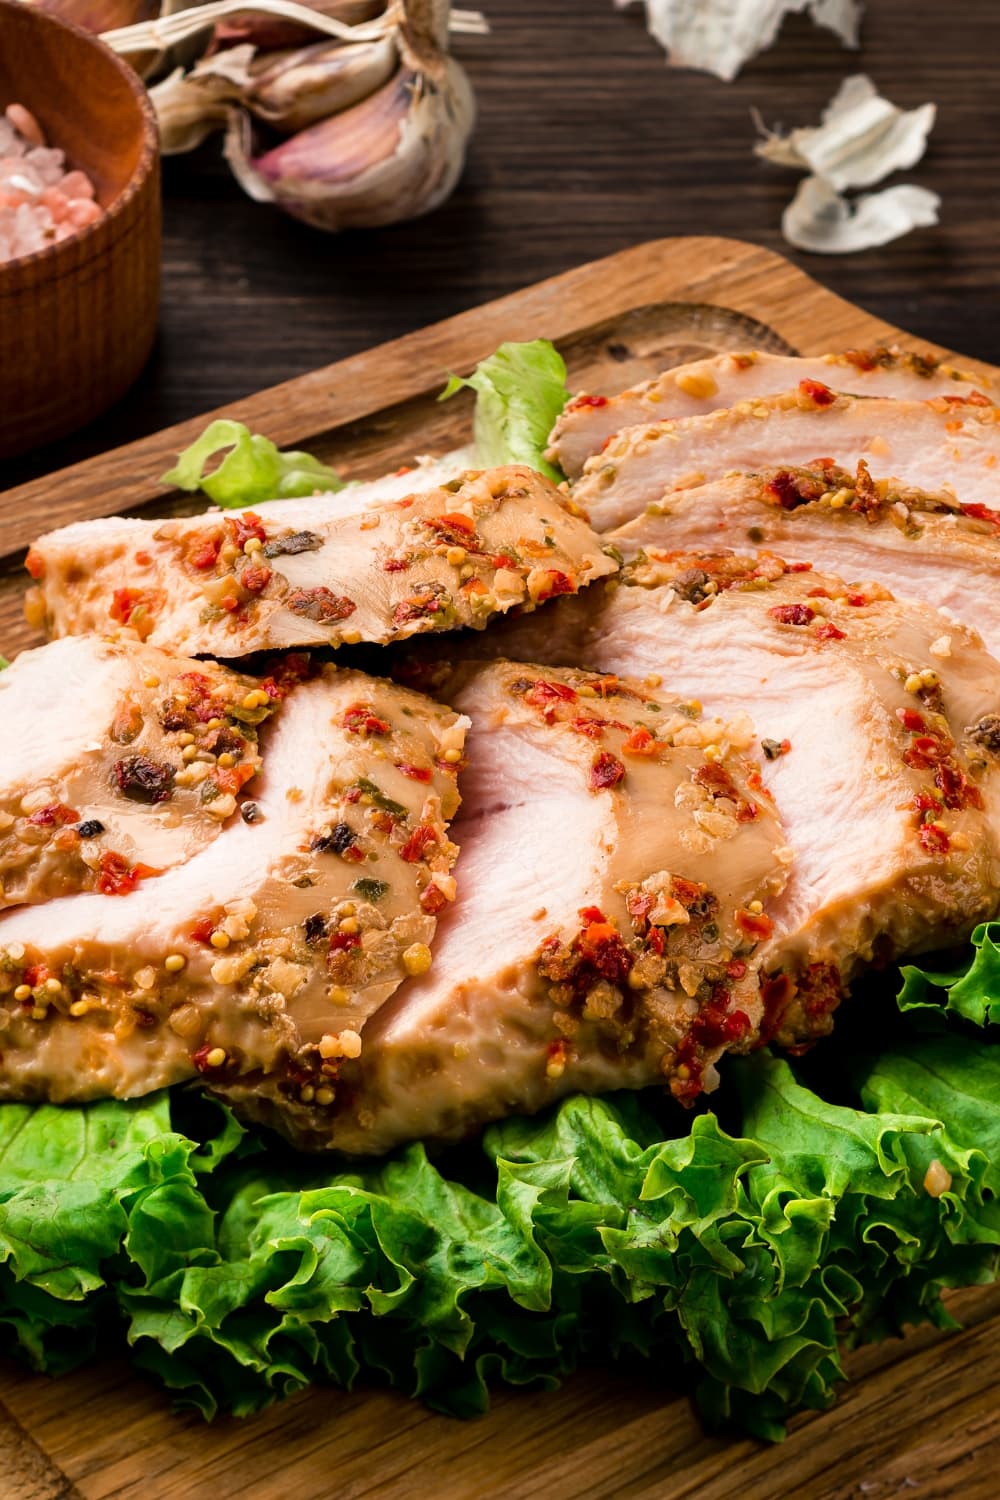 Sliced Sous Vide Chicken Breast with Green Lettuce Leaves Plated on a Wooden Cutting Board